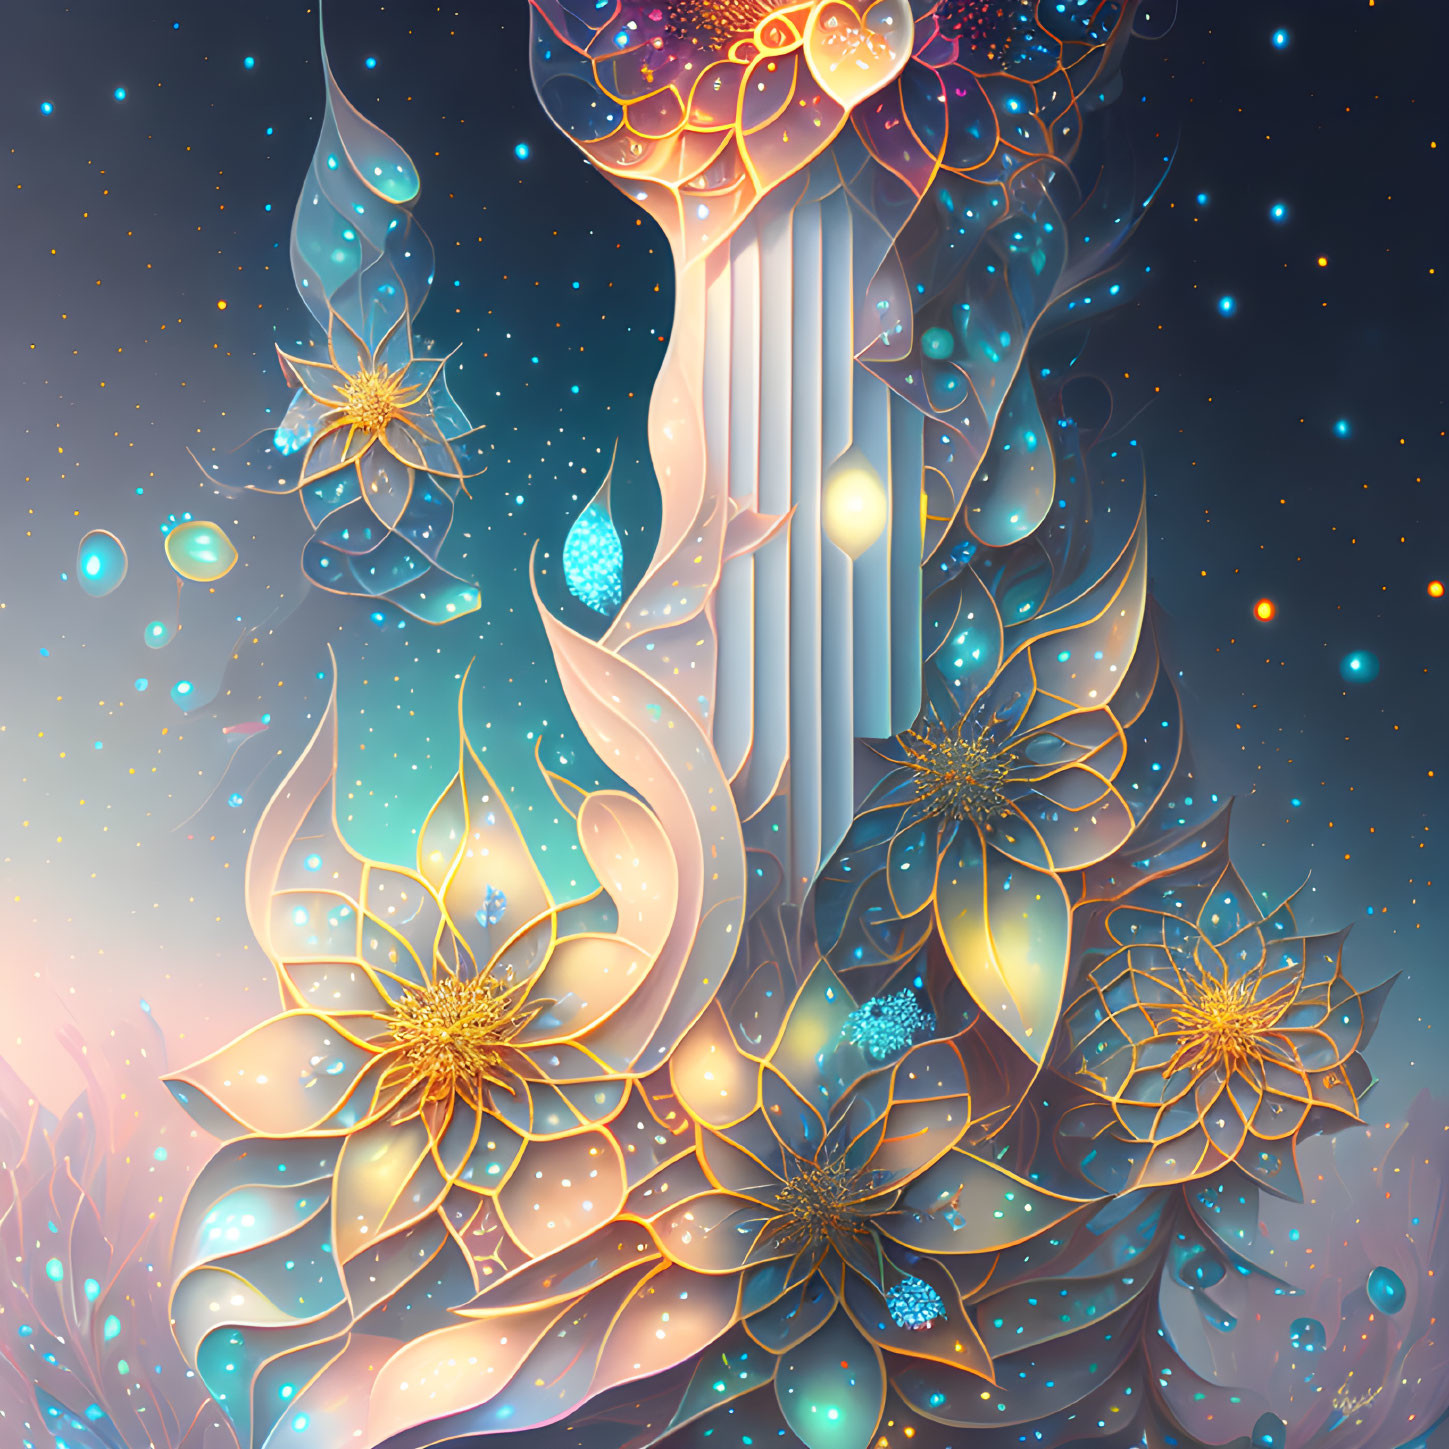 Cosmic harp with golden floral patterns on starry night sky